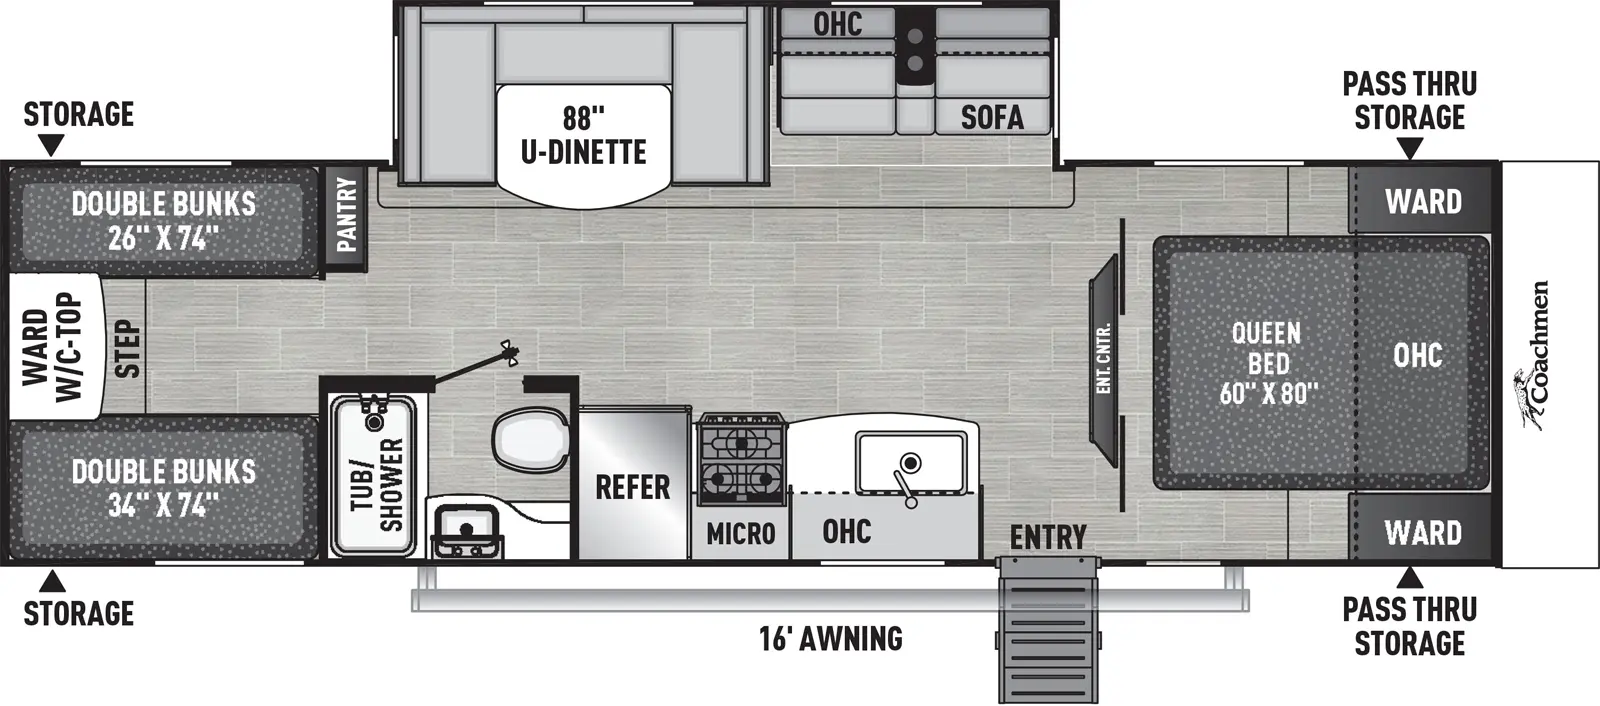 The 29SE has one slide out and one entry. Exterior features front pass-thru storage, a 16 foot awning, and rear storage on both sides. Interior layout front to back: foot-facing queen bed with overhead cabinet and wardrobes on each side; an island entertainment center; off-door side slideout with sofa, overhead cabinet, and u-dinette; door side entry, kitchen counter with sink, overhead cabinet, microwave, cooktop and refrigerator; door side full bathroom; off-door side pantry; rear bunk room with opposing double bunks, and rear wardrobe with countertop and a step.